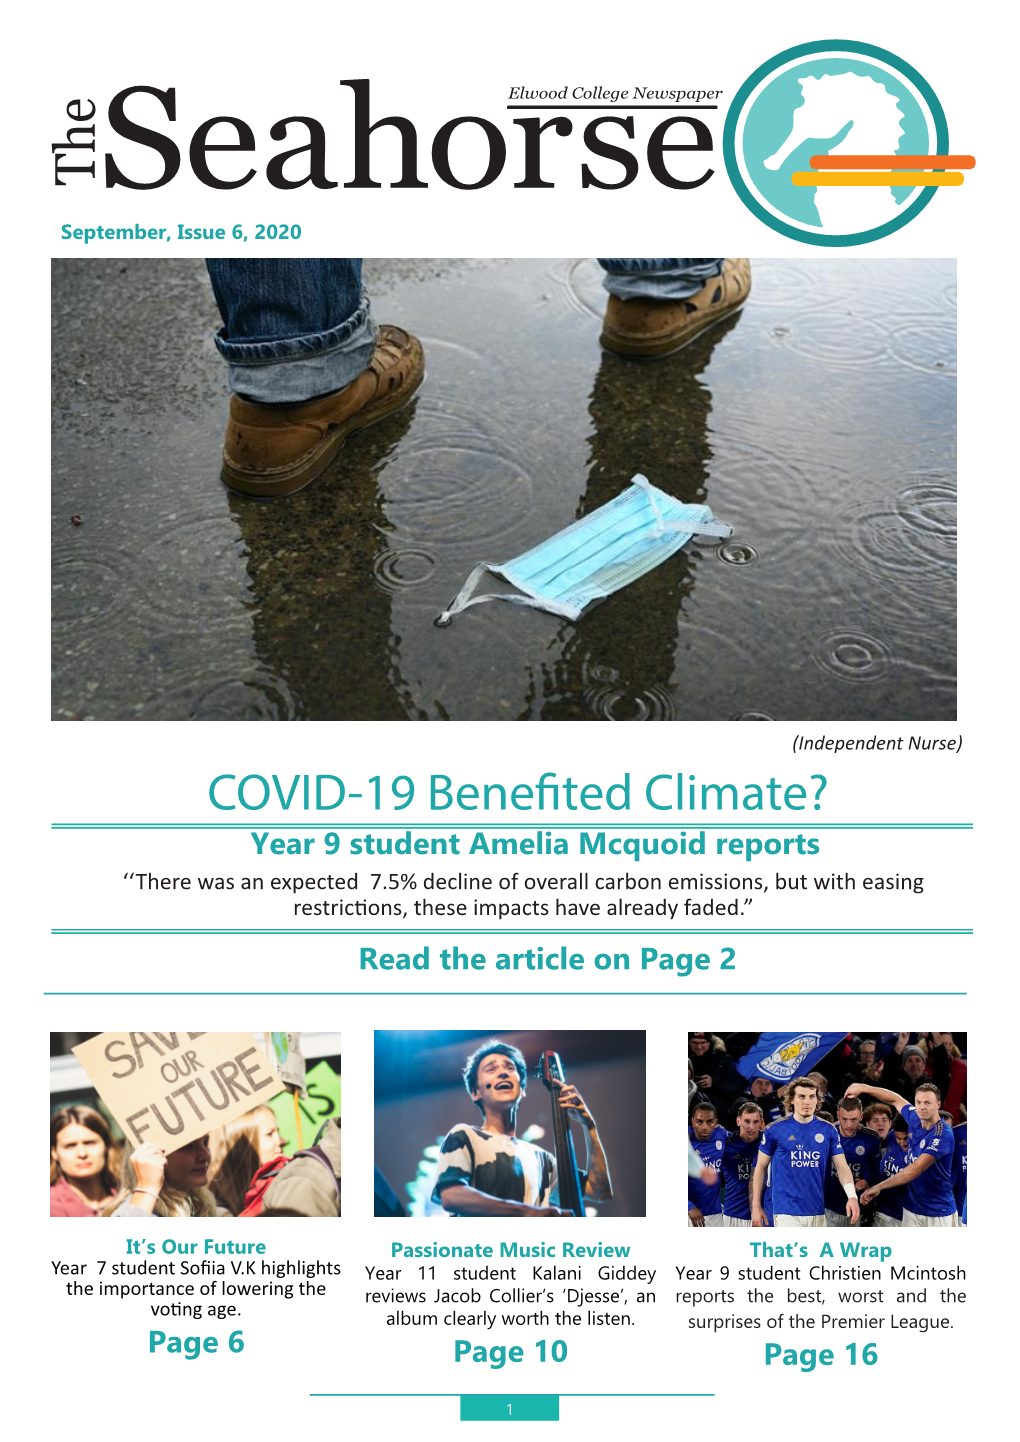 COVID-19 Benefited Climate?